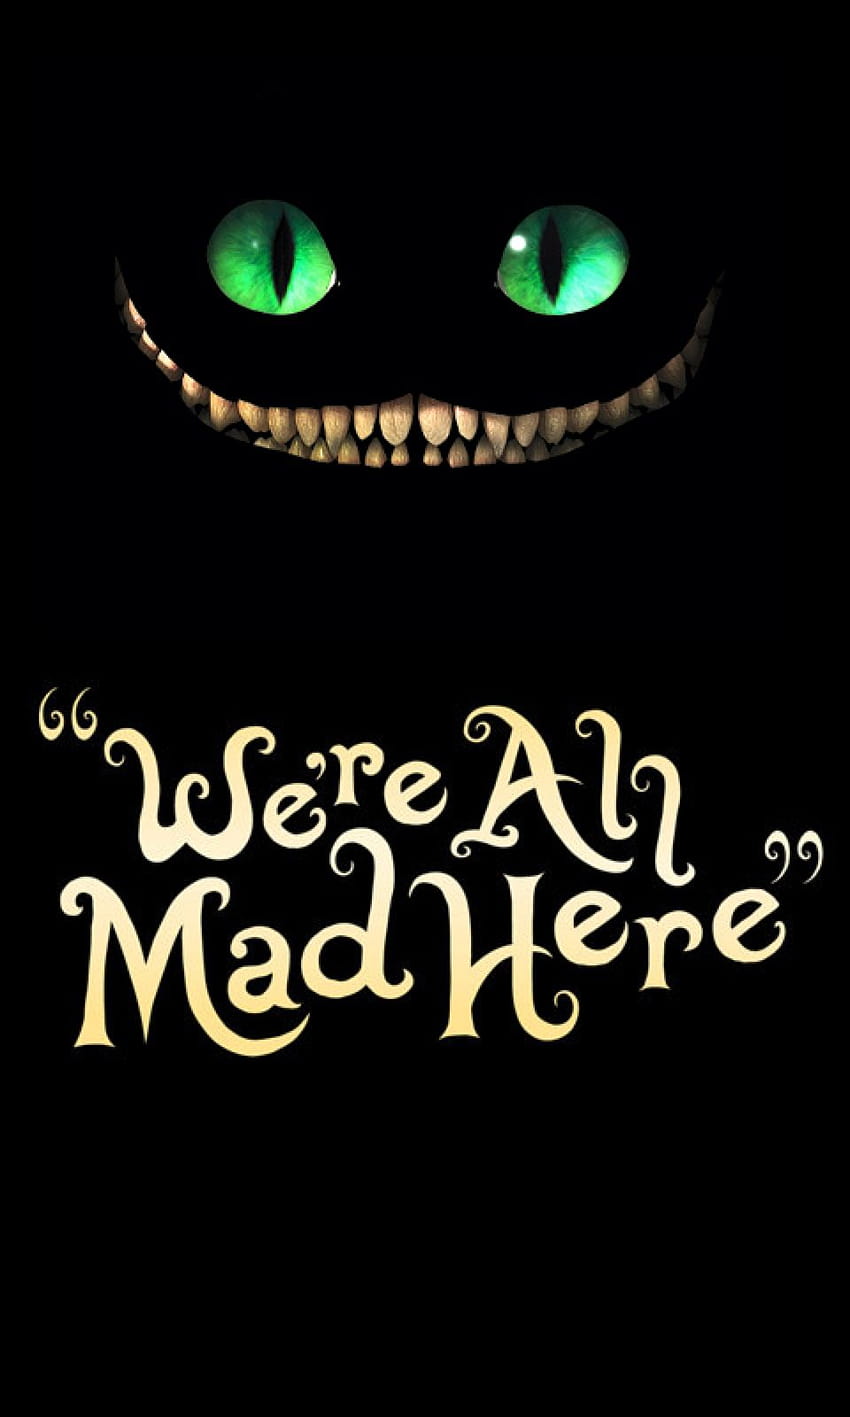 We Re All Mad Here 投稿者 Sarah Cunningham, were all mad here HD電話の壁紙